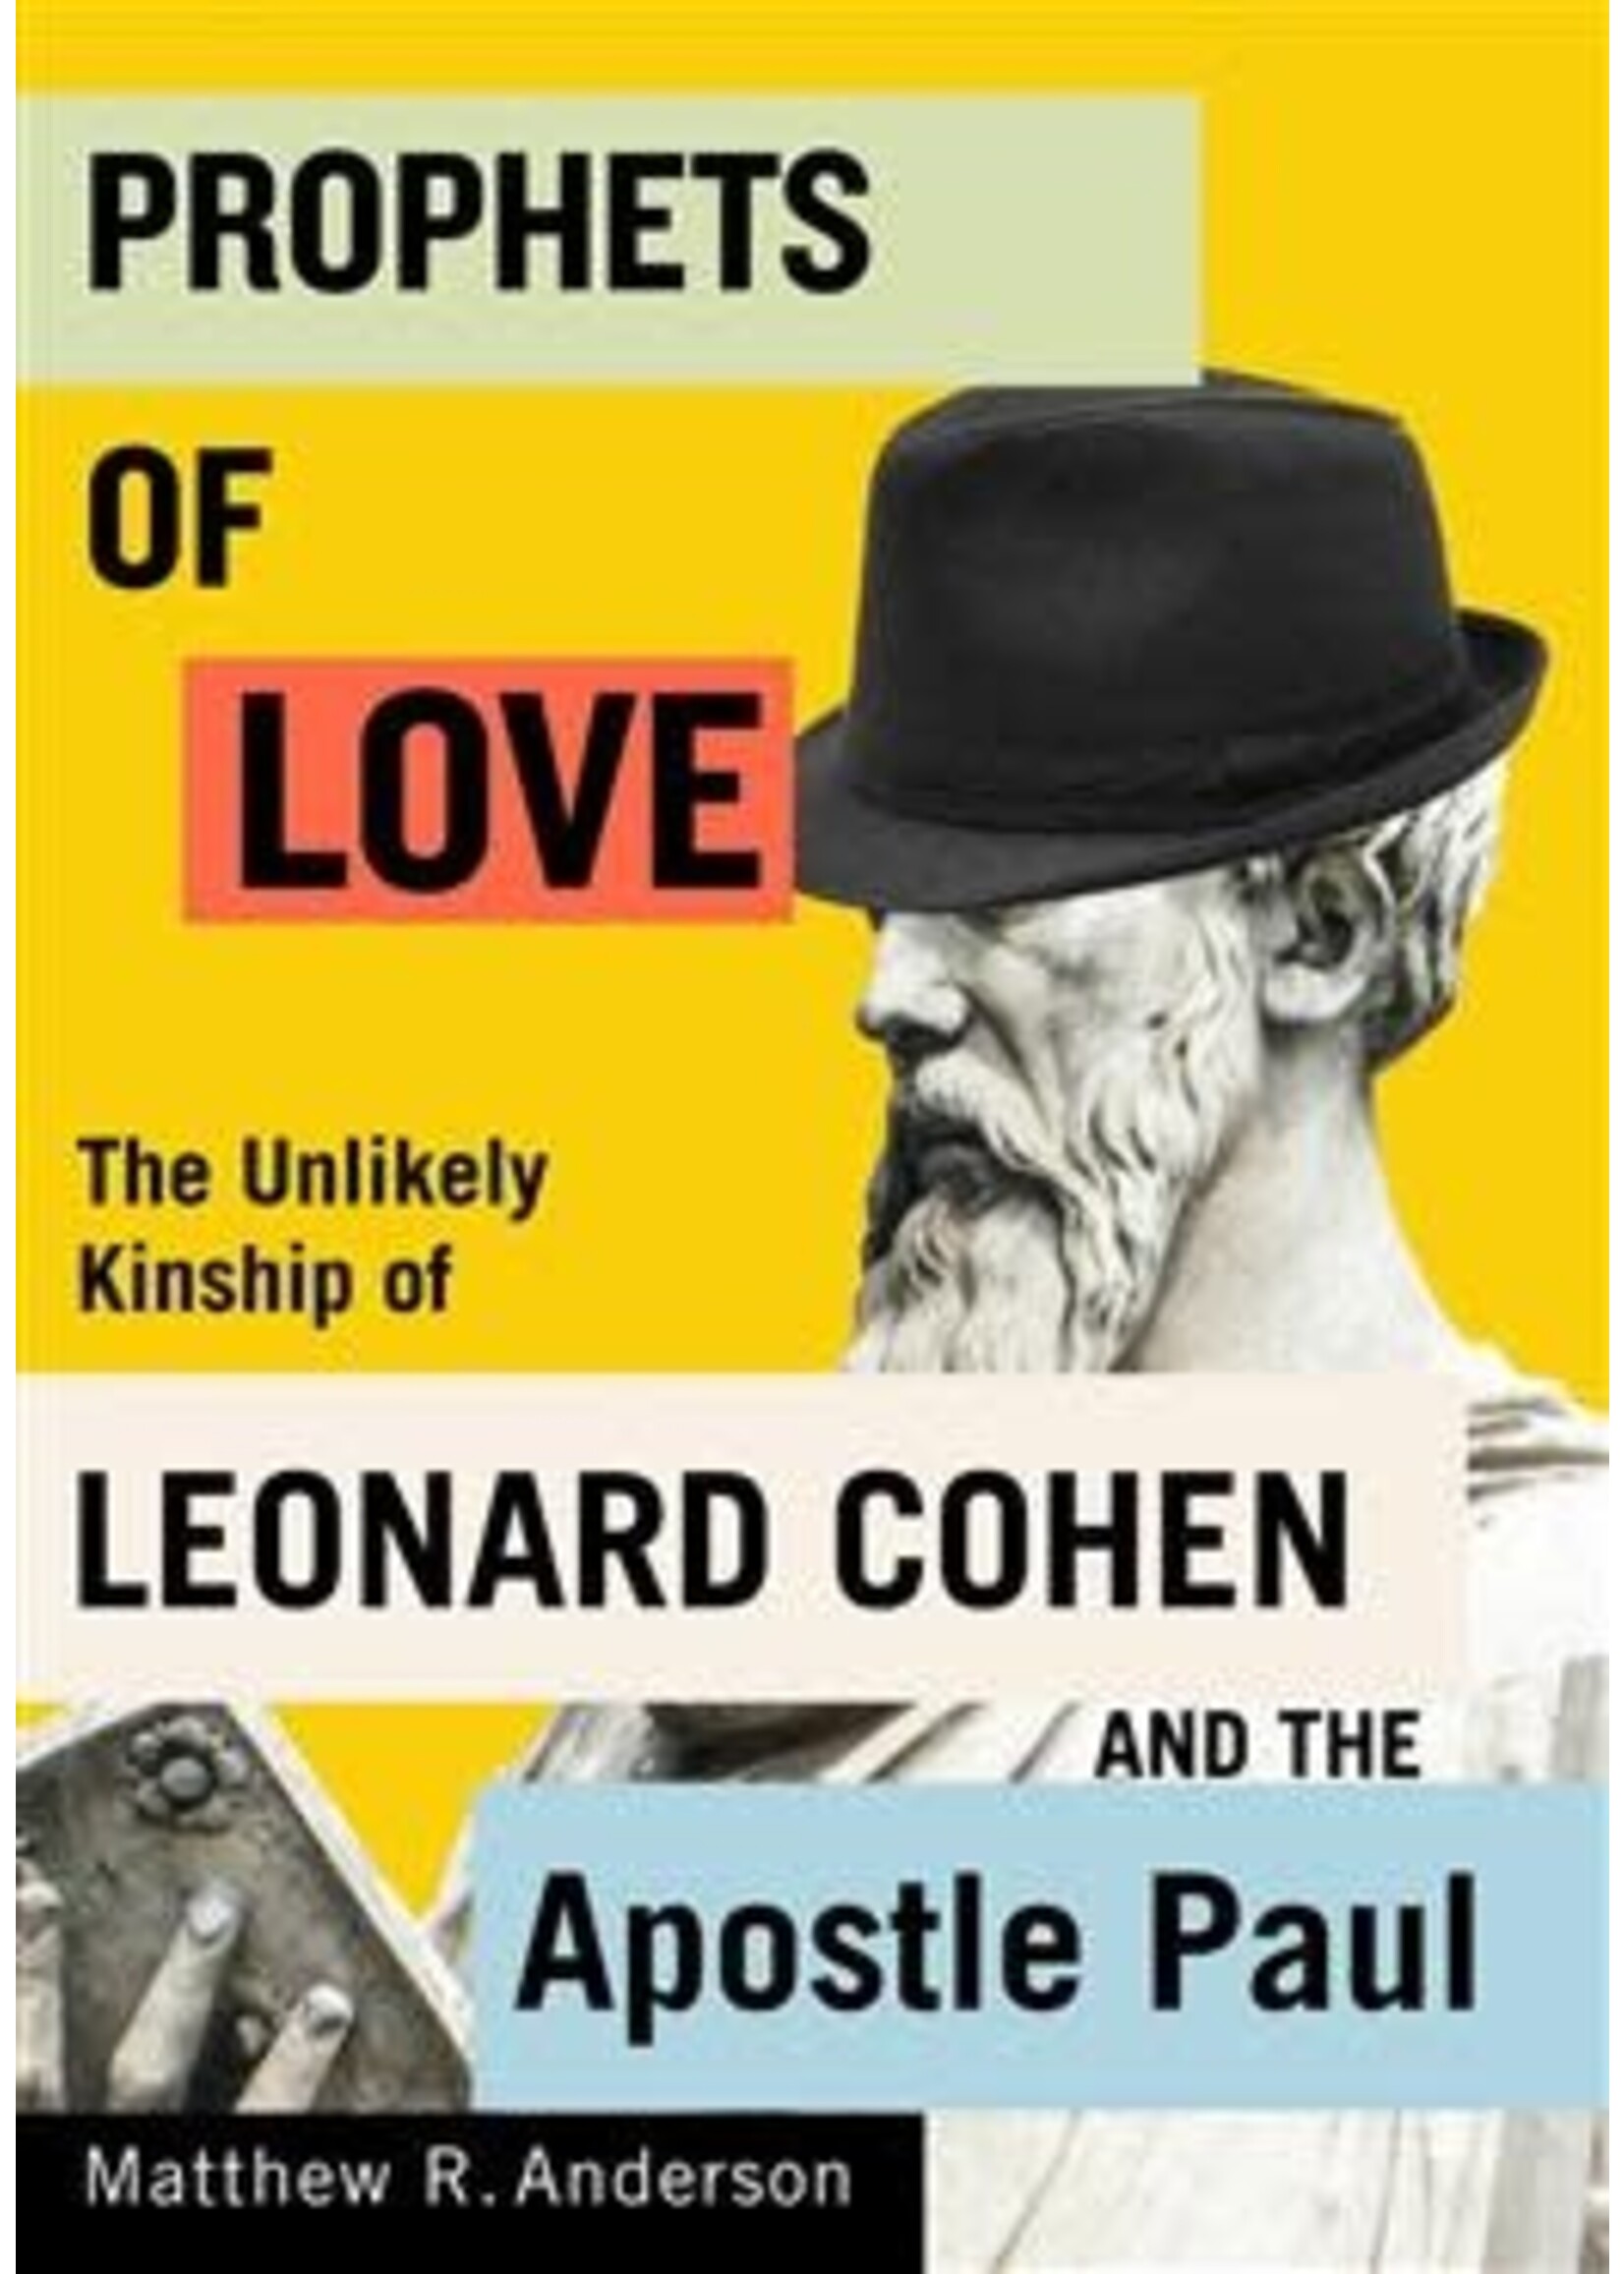 Prophets of Love: The Unlikely Kinship of Leonard Cohen and the Apostle Paul by Matthew R. Anderson